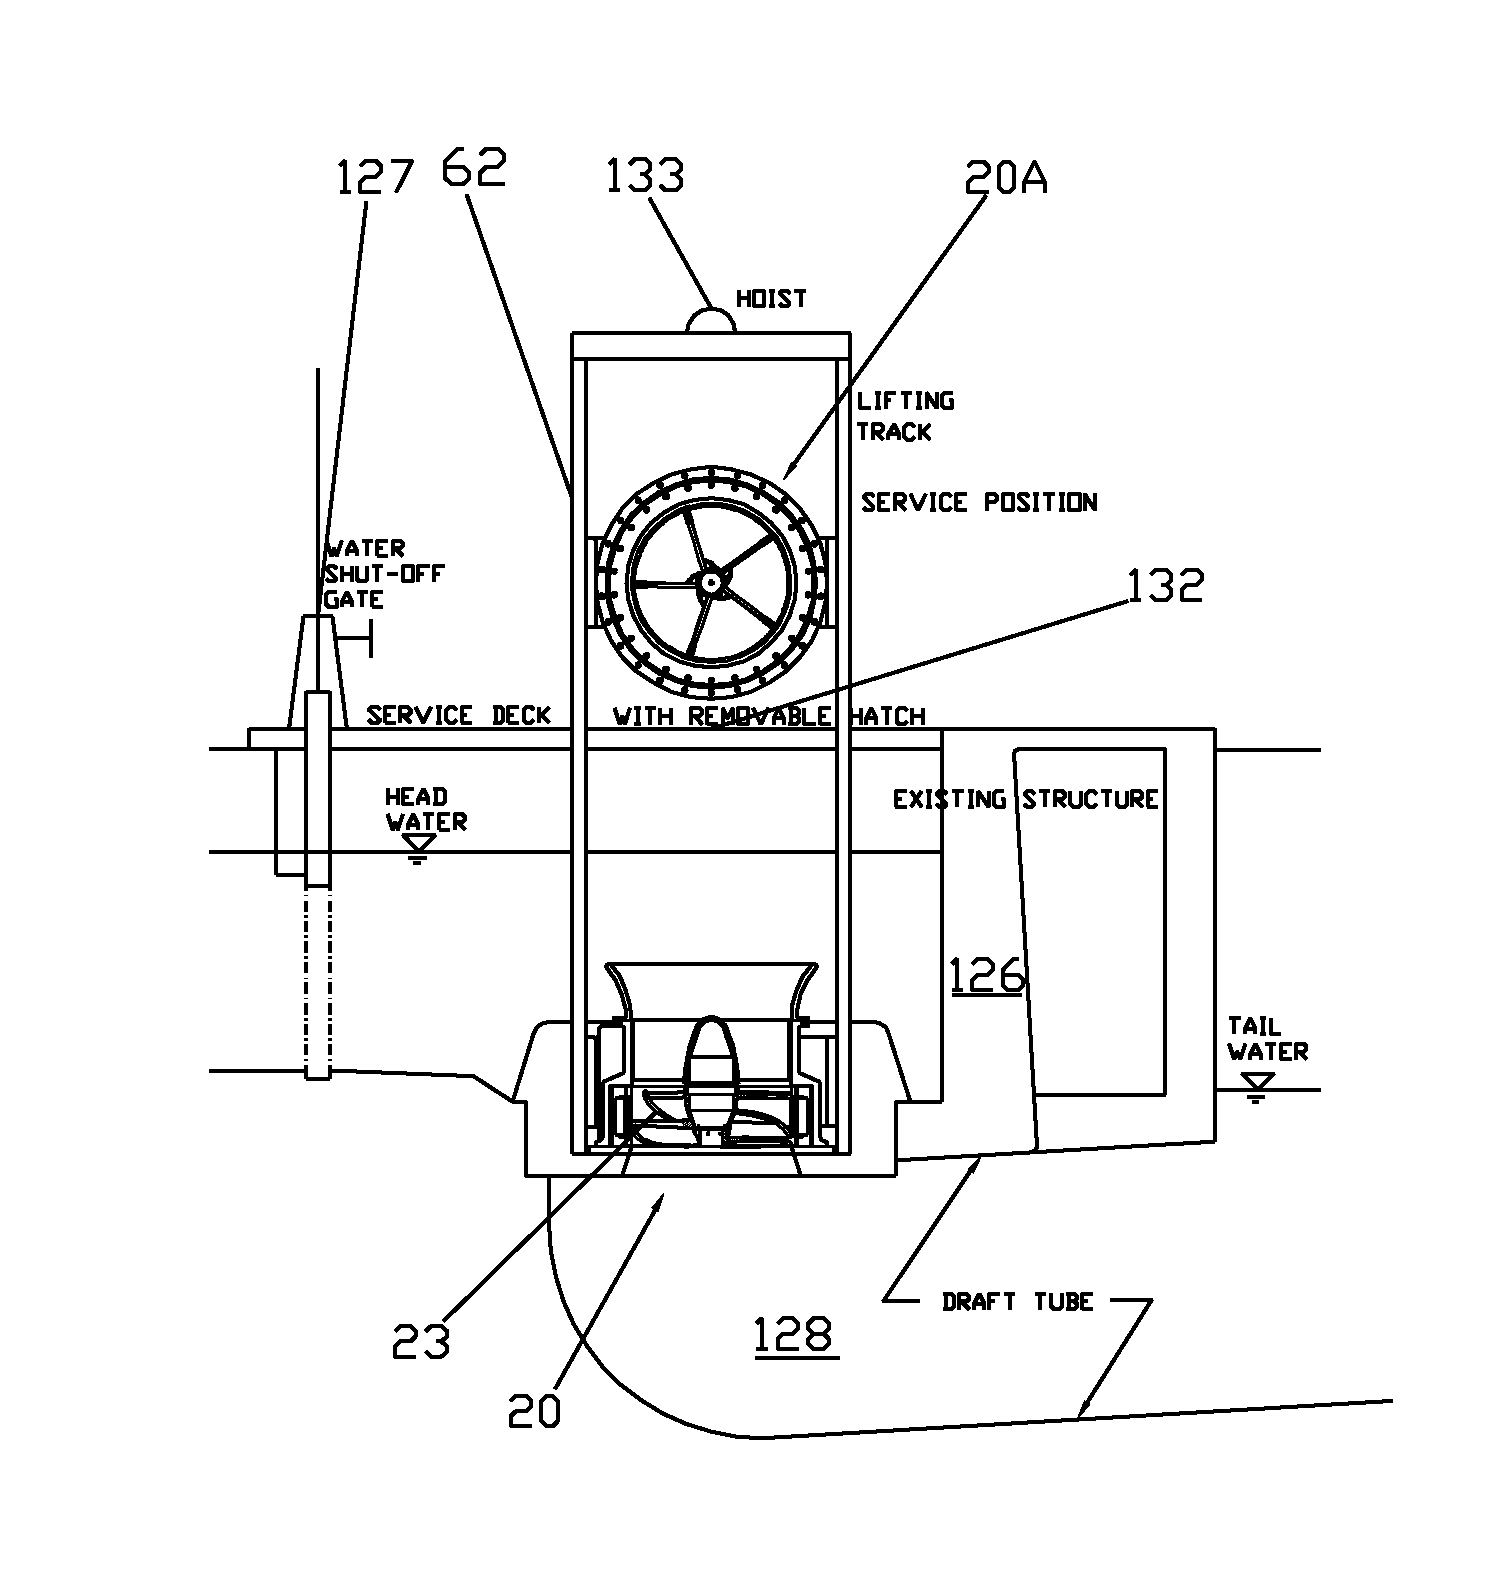 Power Conversion and Energy Storage Device